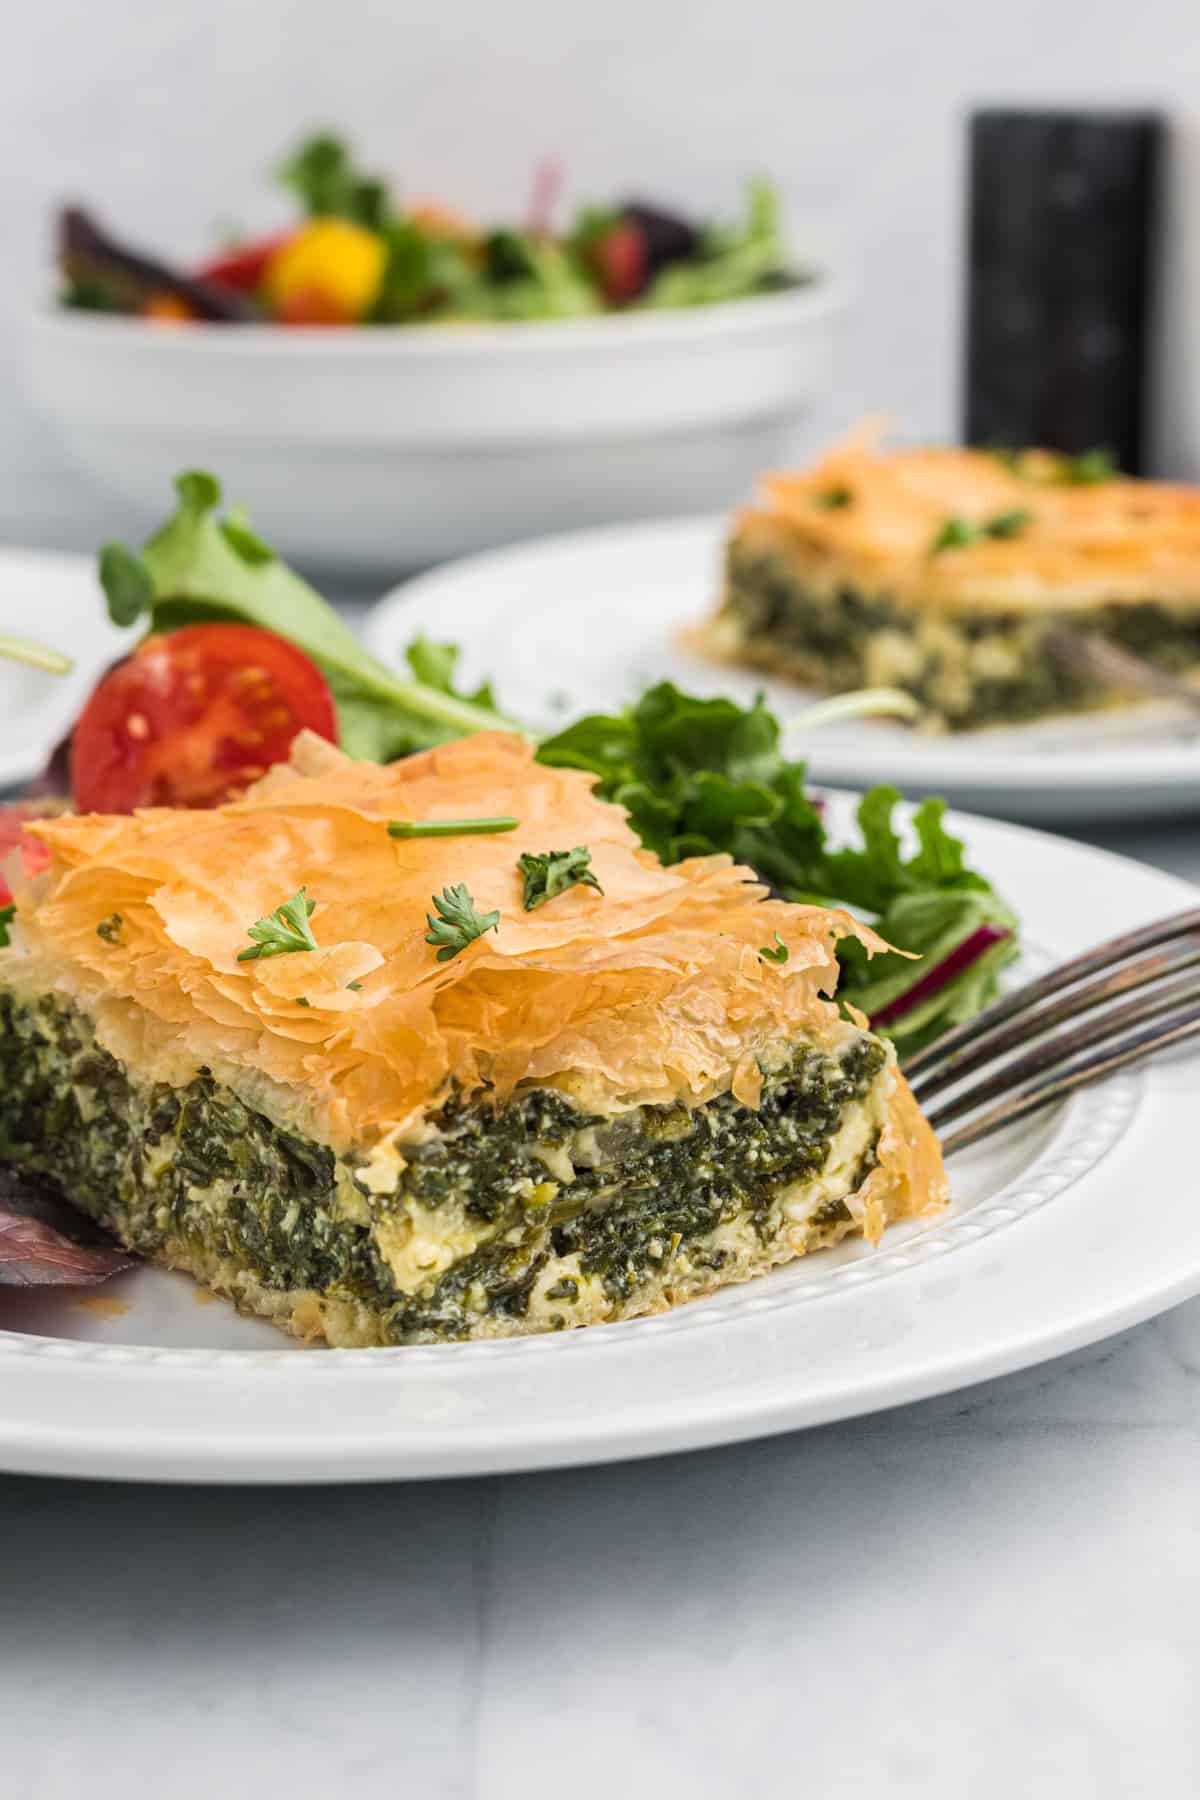 A slice of spanakopita is placed on a white plate next to a side salad.